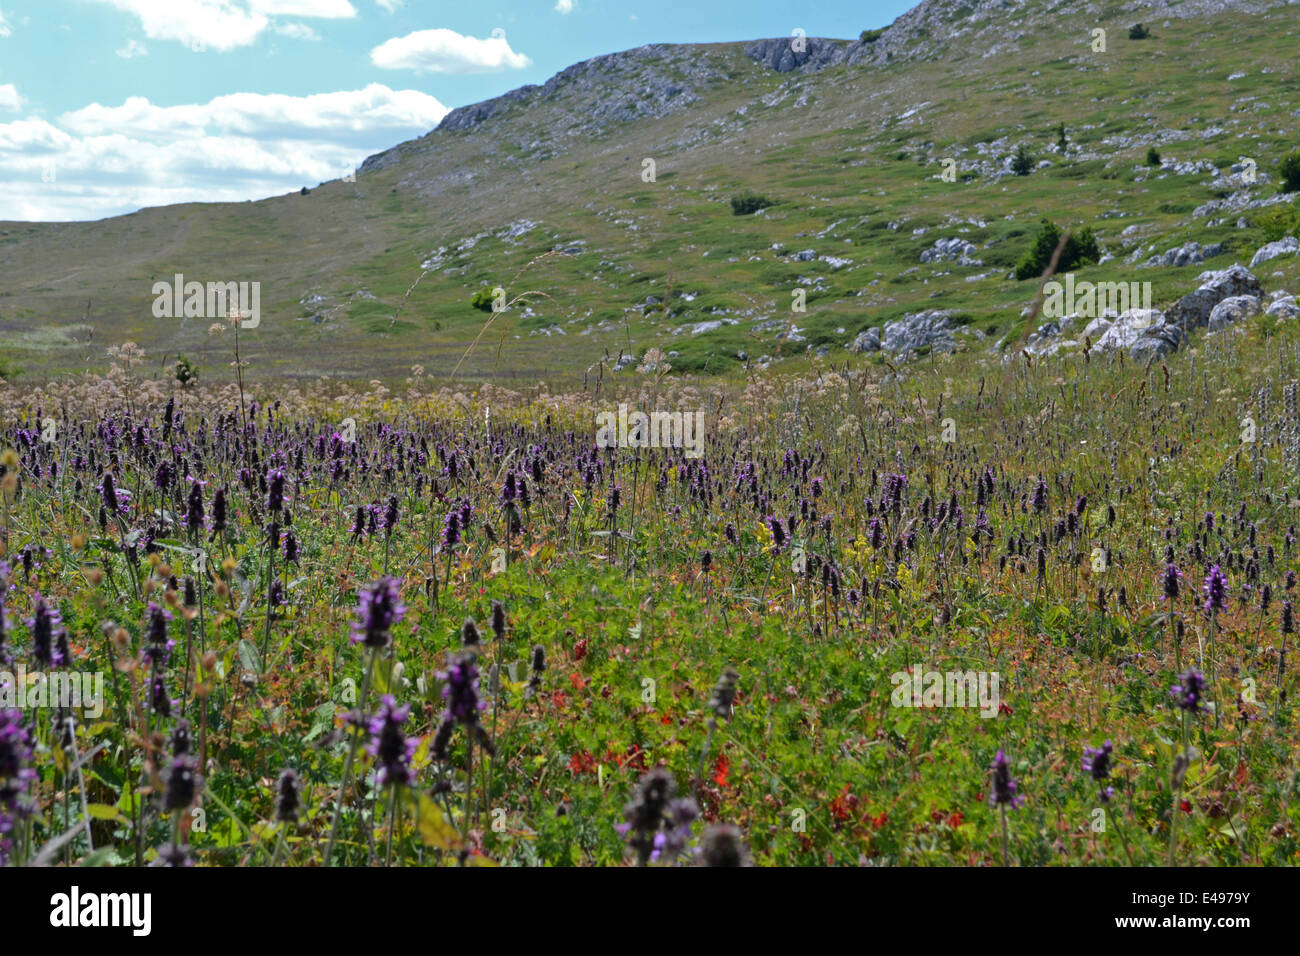 Lots of flowers on the plateau mountains Stock Photo